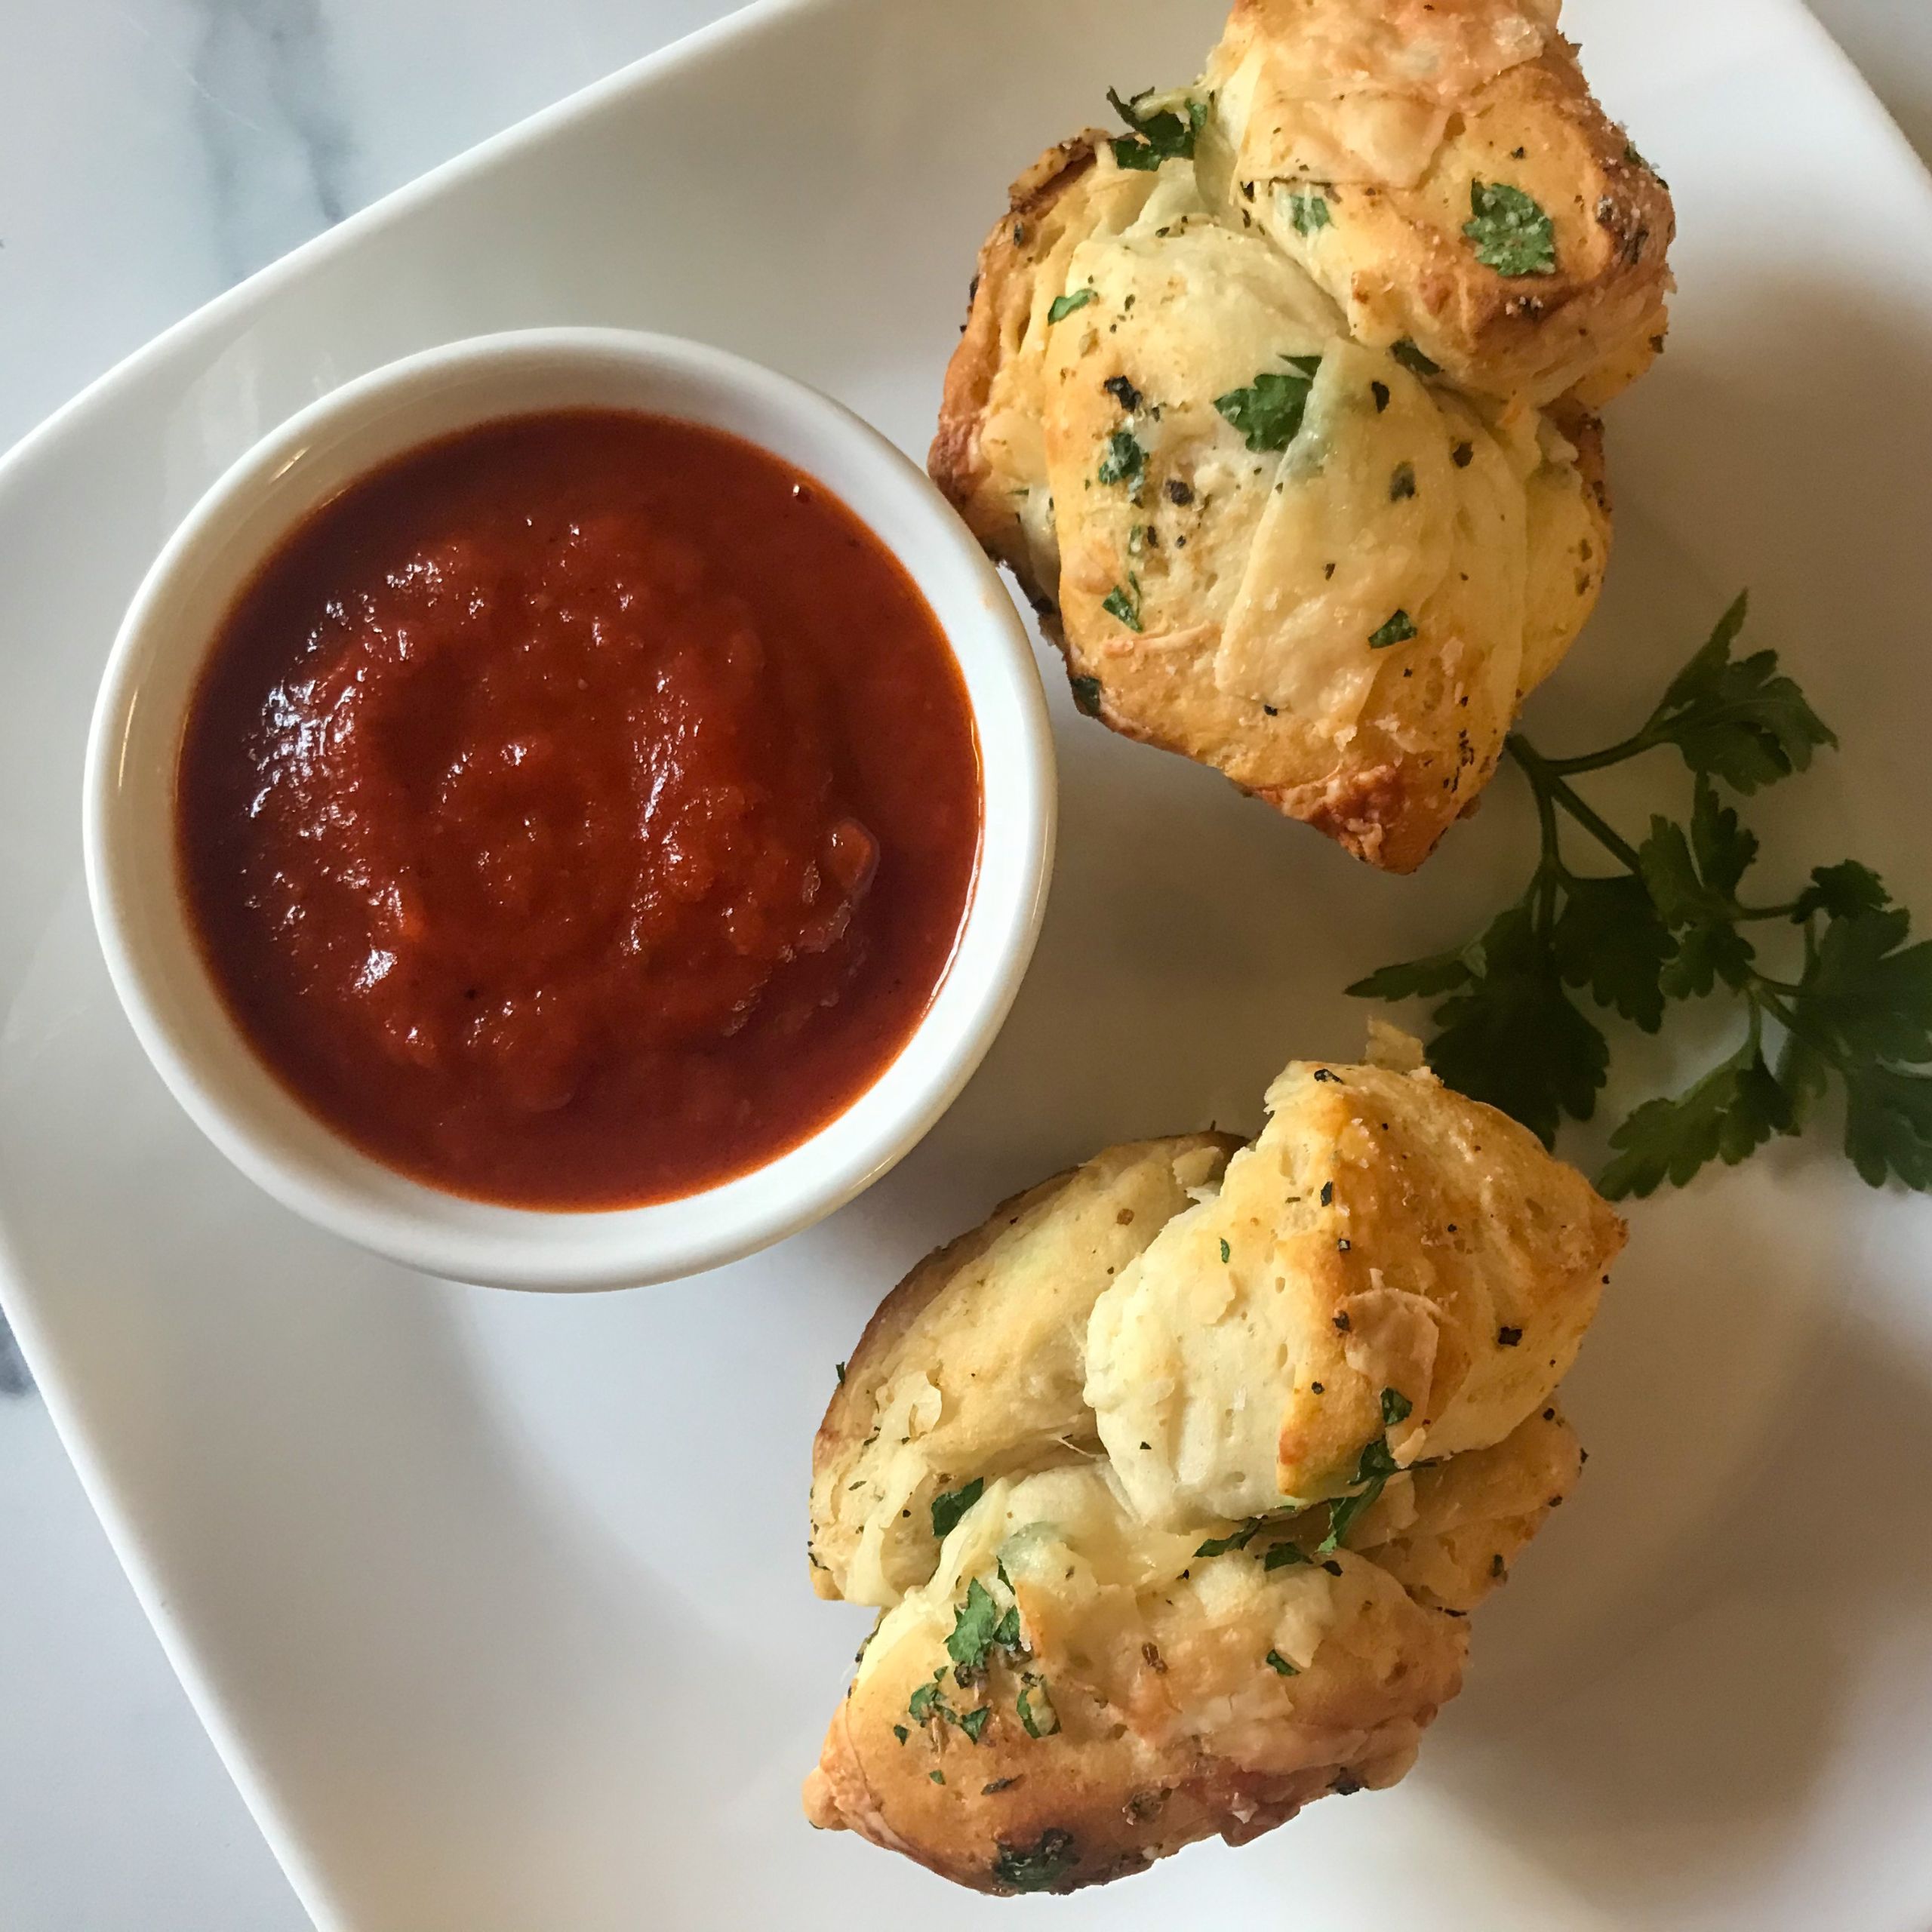 Monkey Cheese and Garlic Muffins |  My Curated Tastes